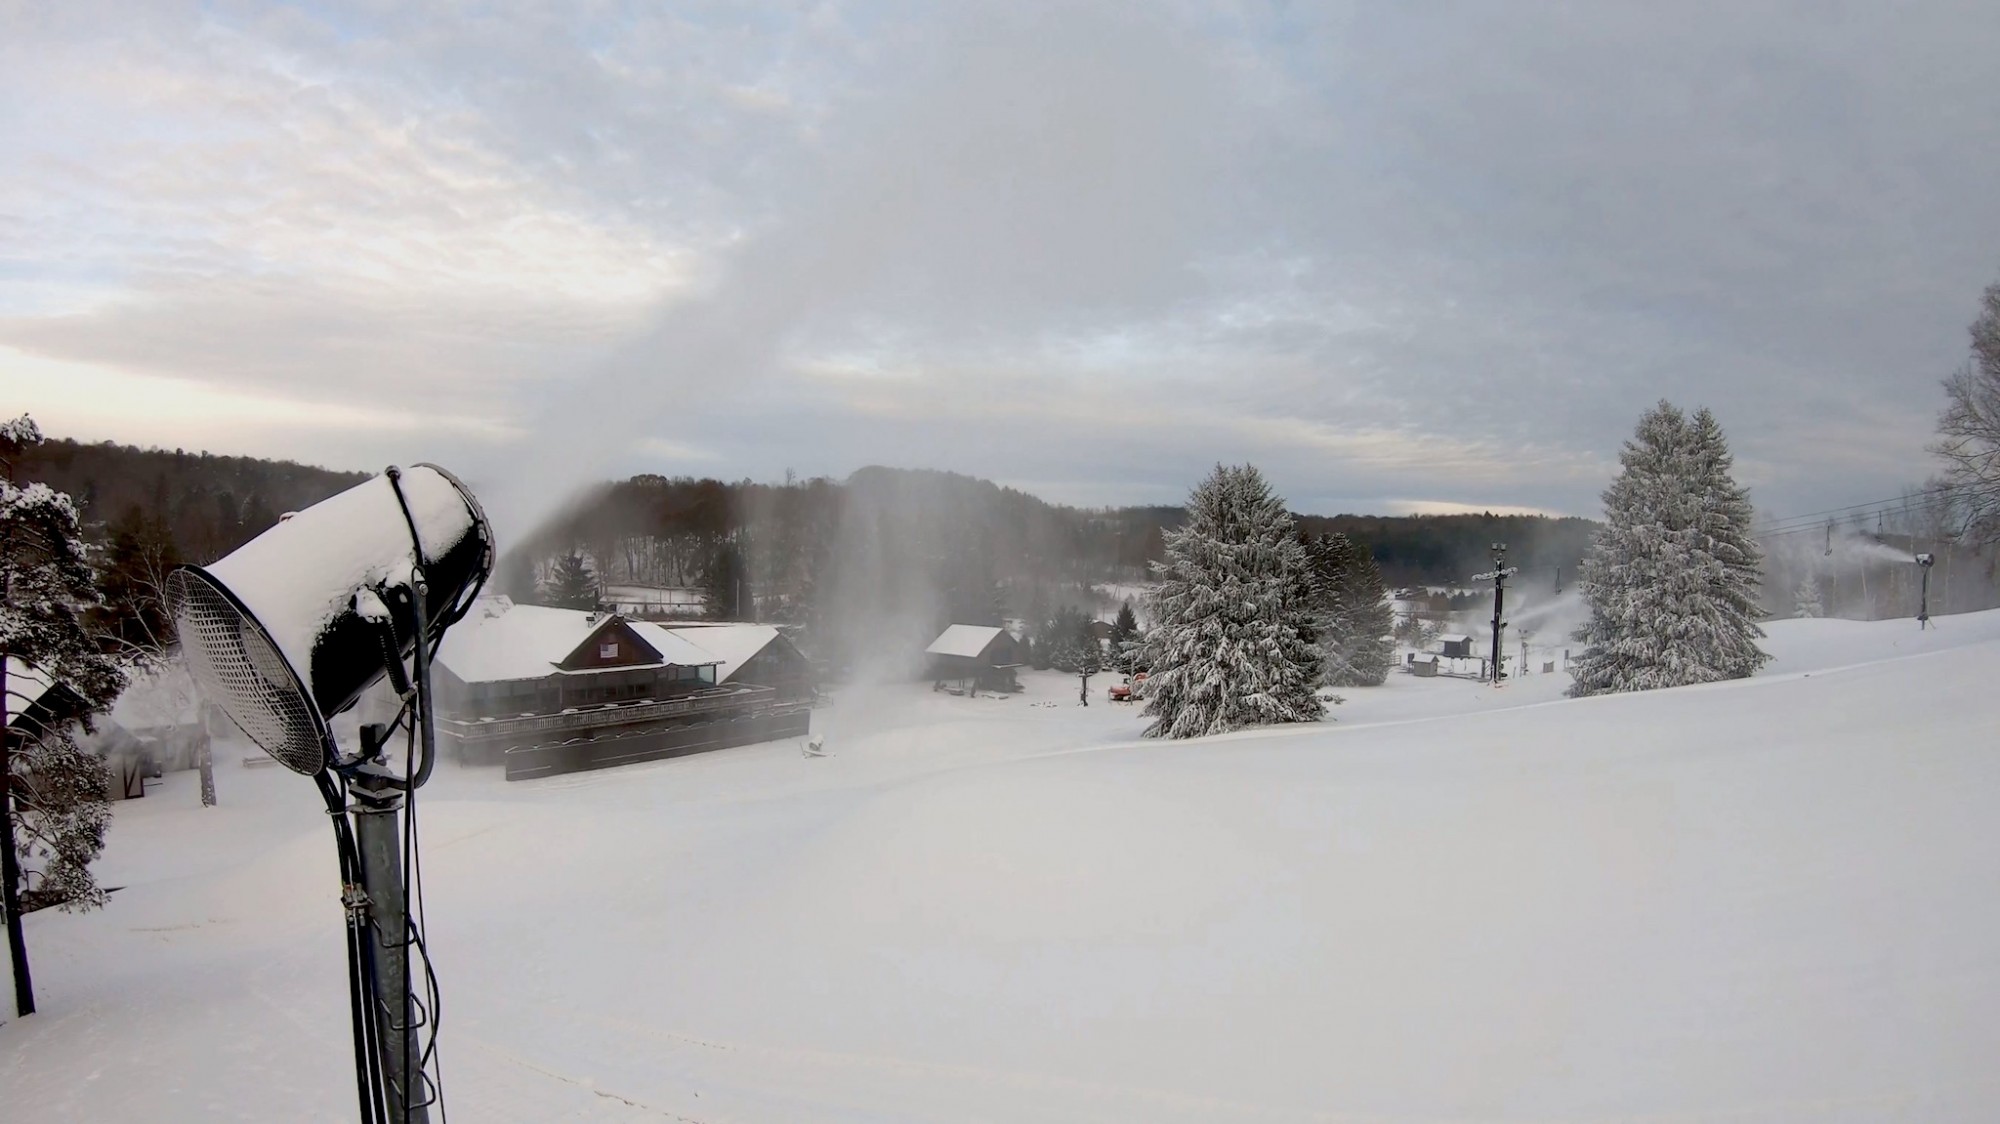 Snow Trails Earliest Ski Season Opening in Recorded History